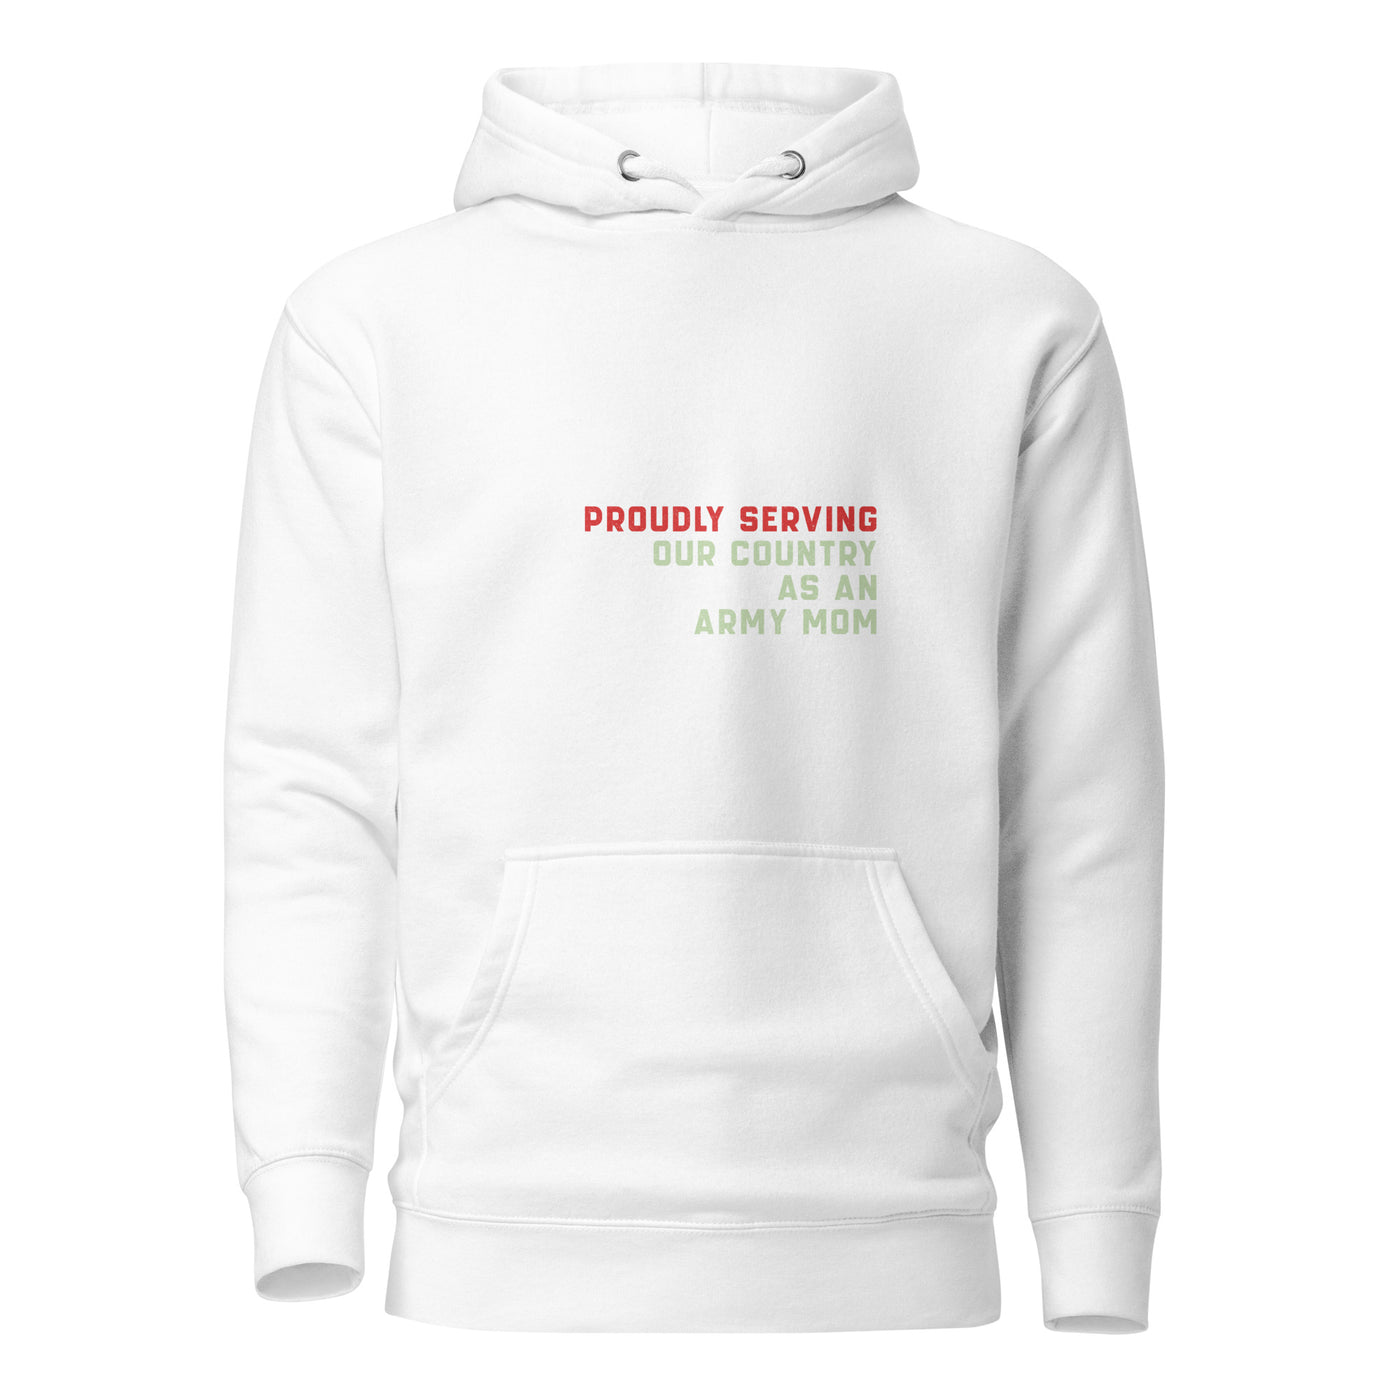 Proudly Serving as an Army Mom - Unisex Hoodie